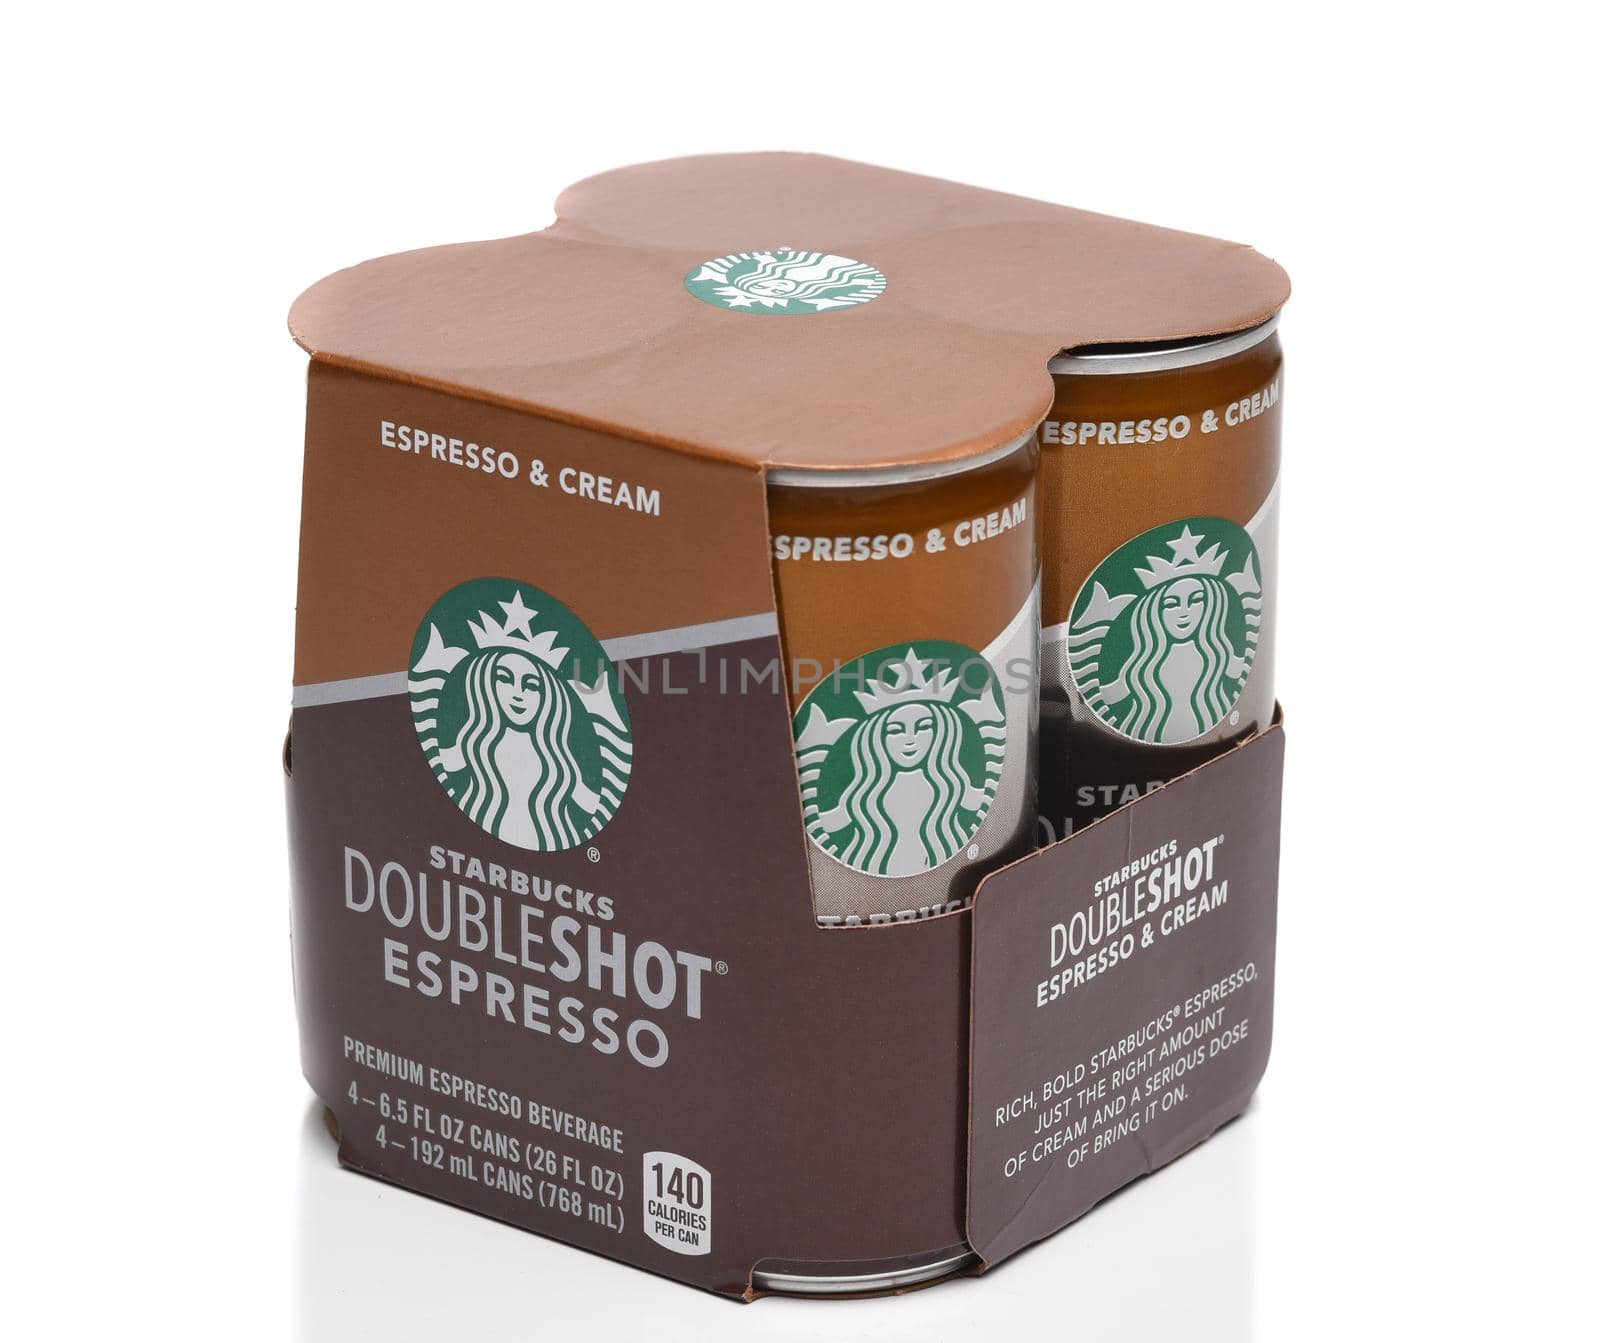 IRVINE, CALIFORNIA - 25 MAY 2020: A 4 can pack of Starbucks DoubleShot Espresso Premium Beverage.  by sCukrov